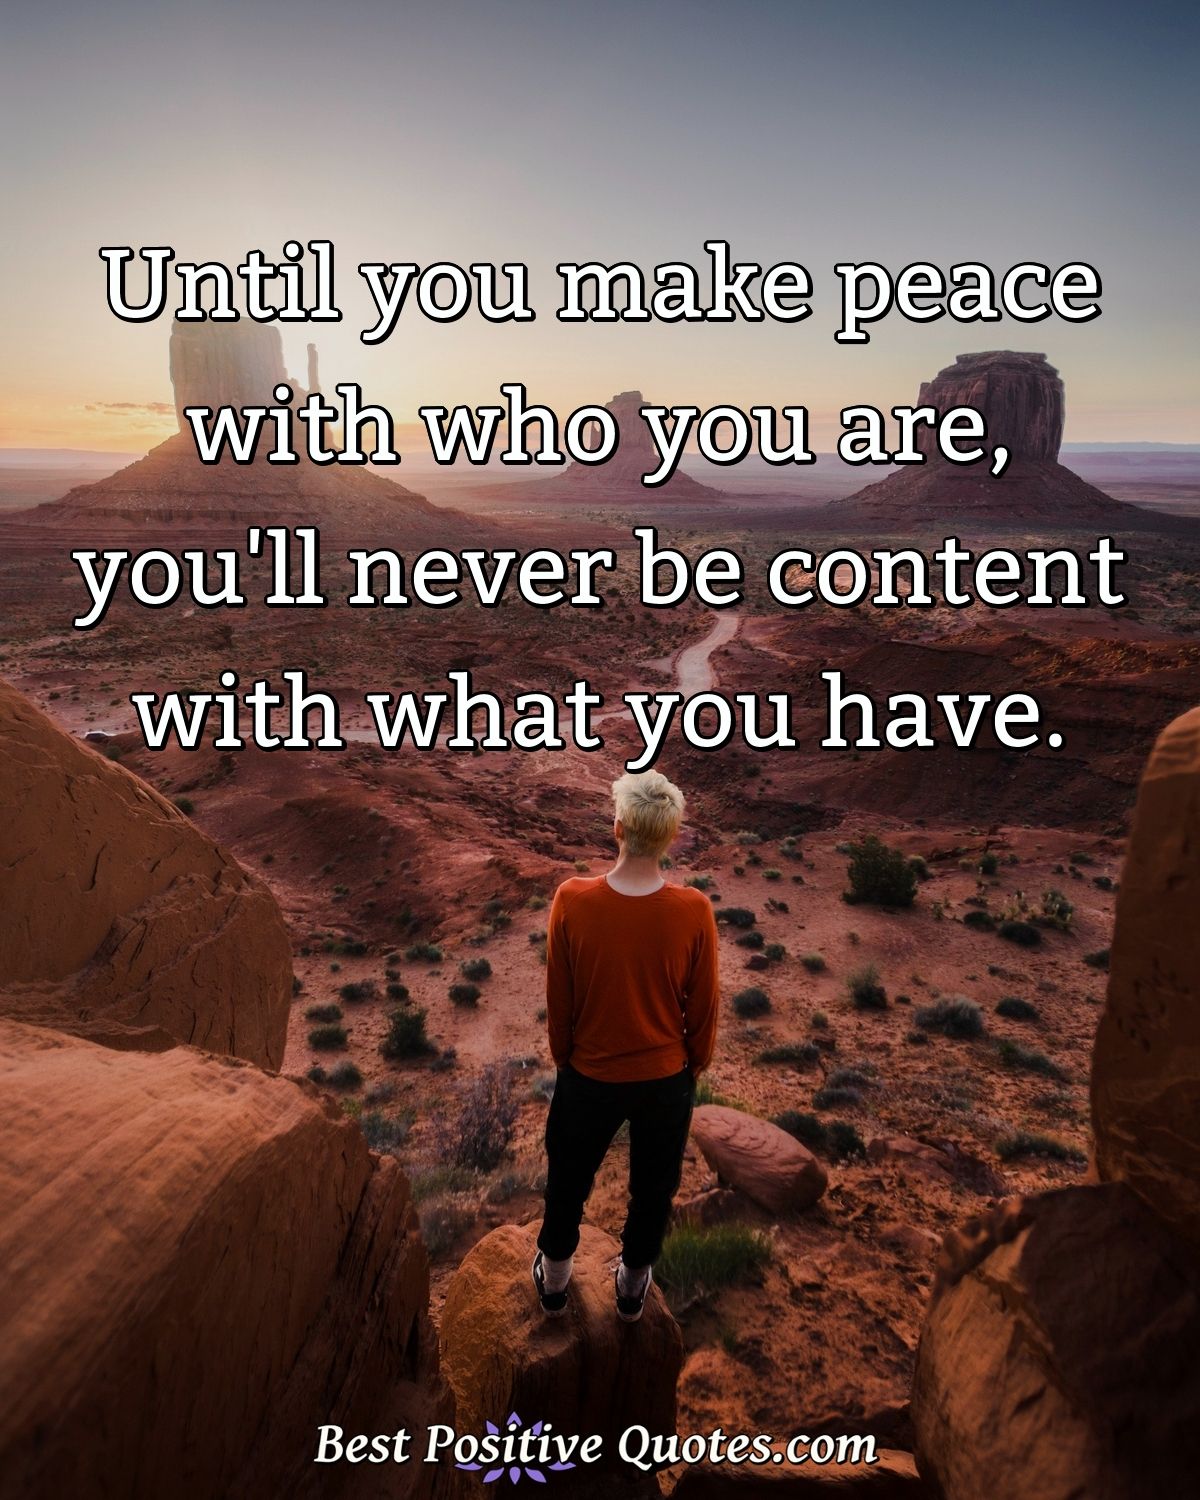 Until you make peace with who you are, you'll never be content with what you have. - Anonymous